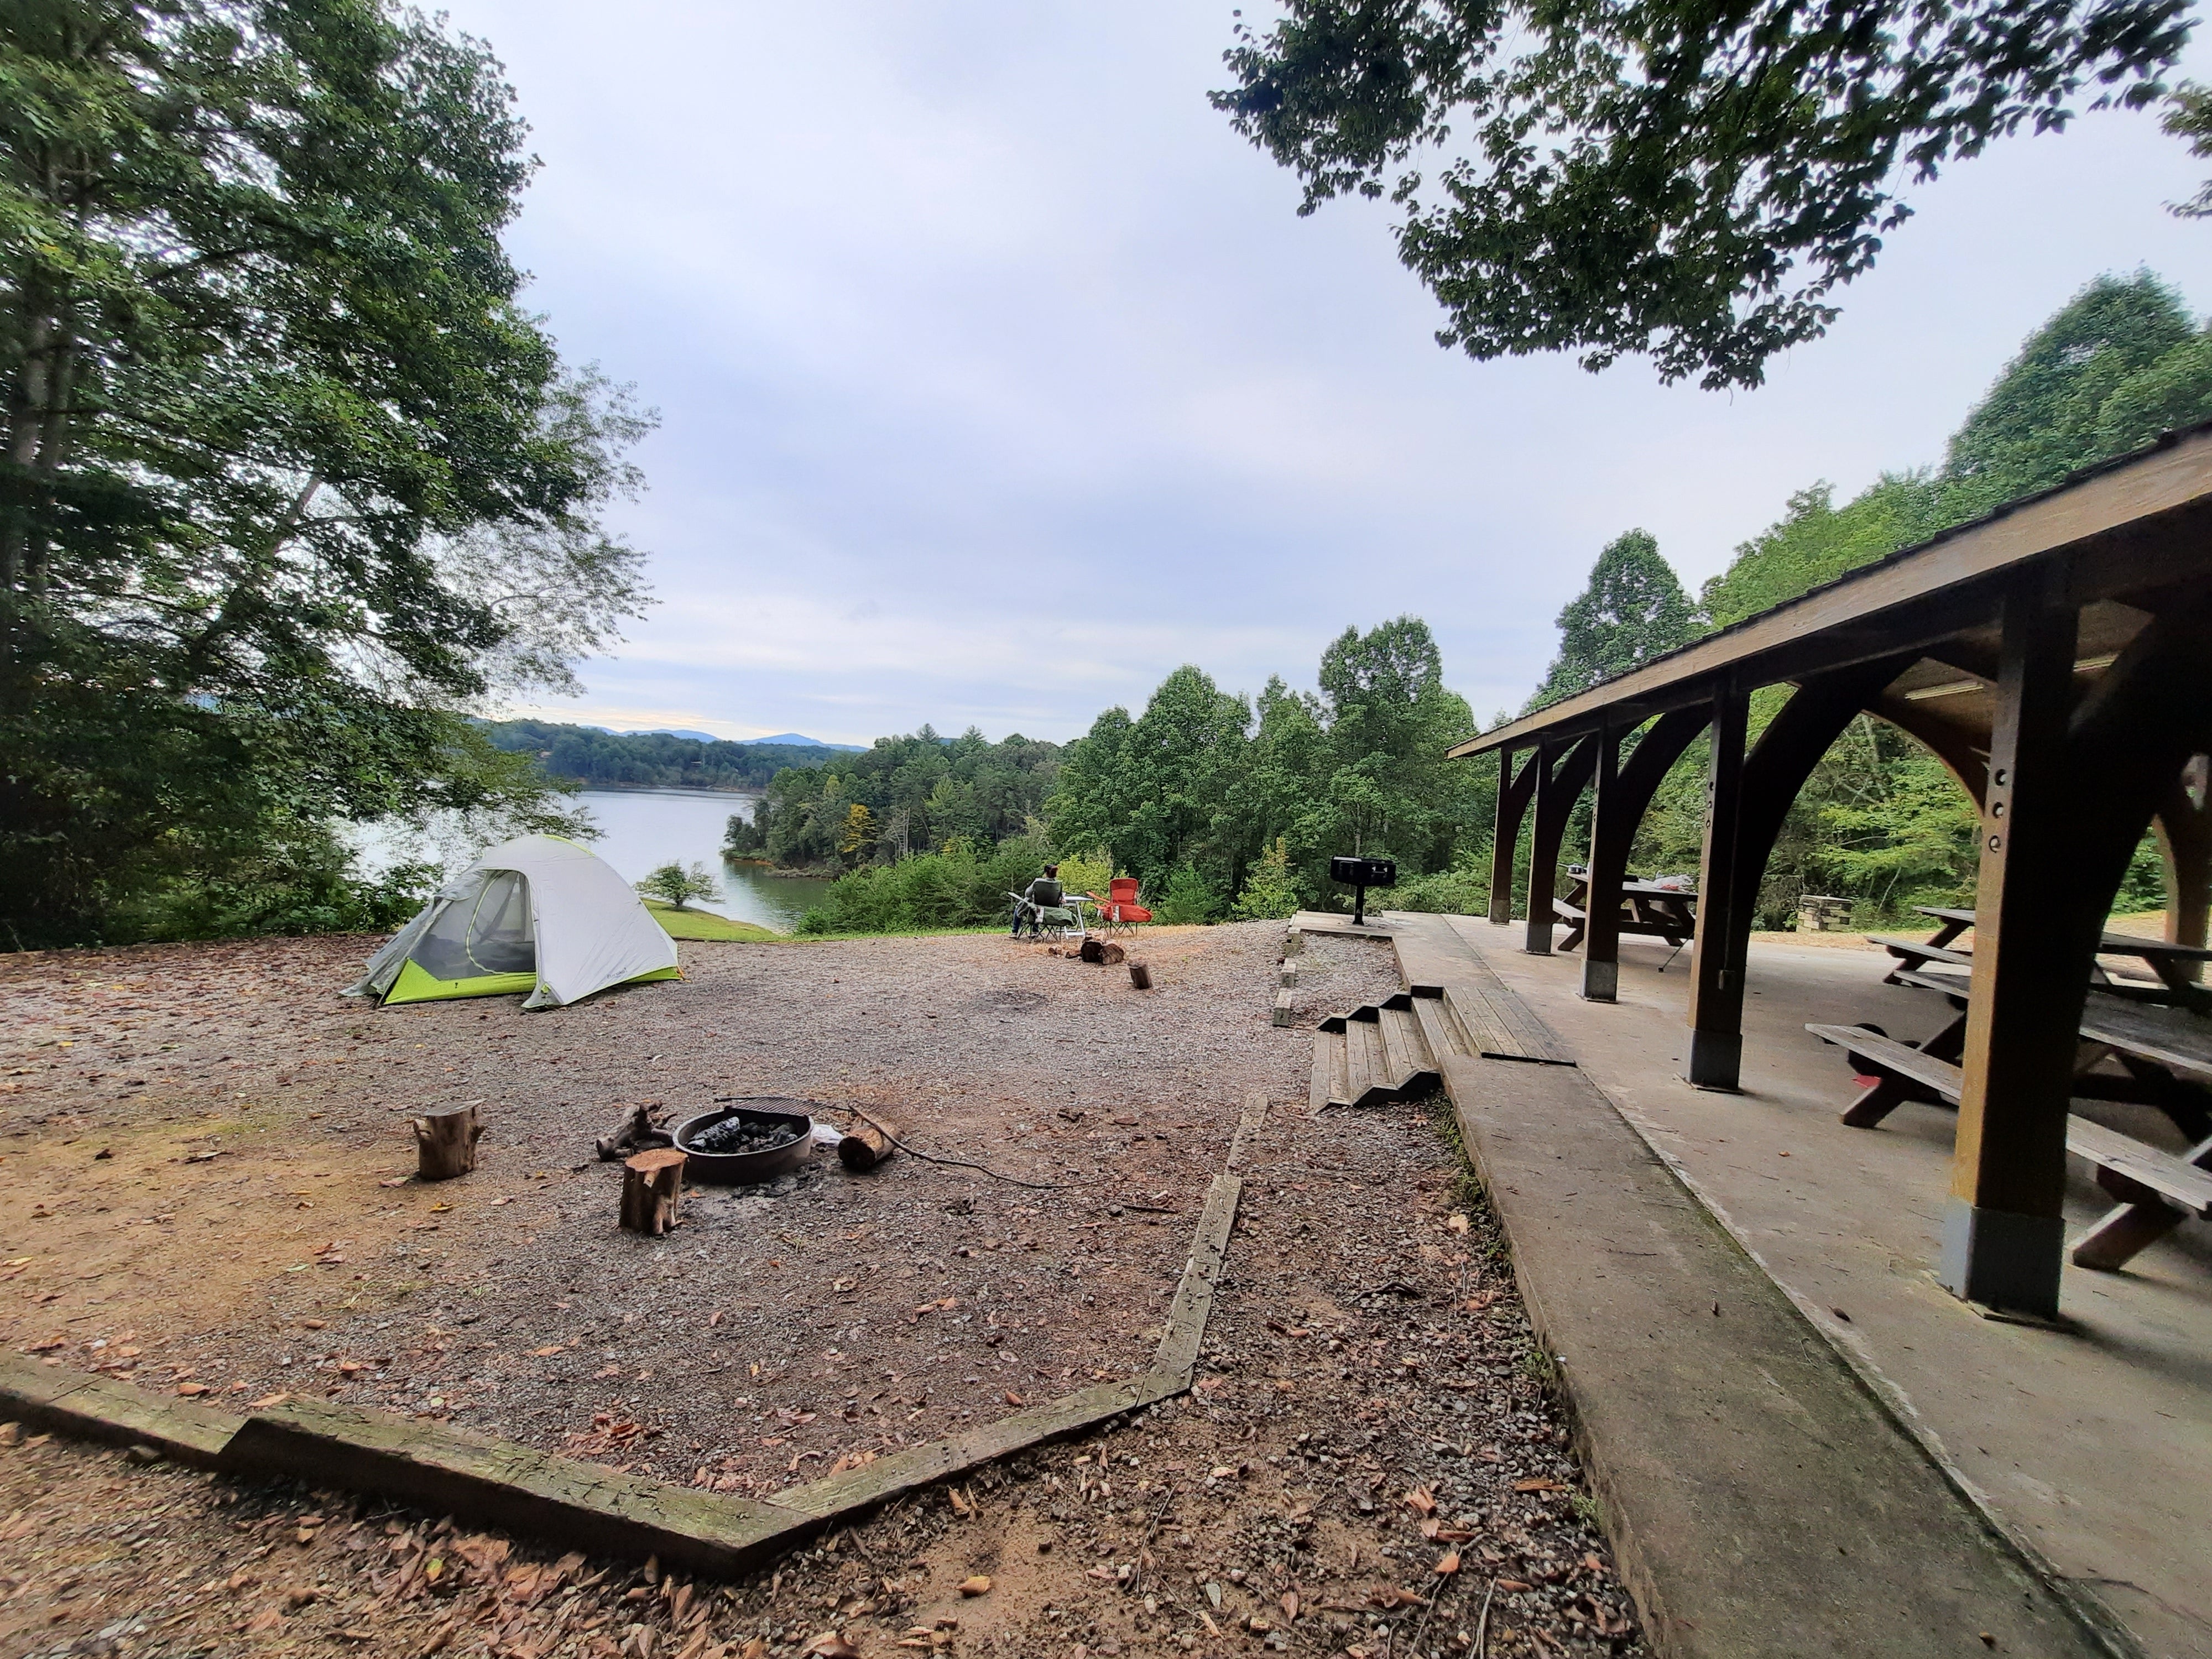 Picnic shelter and the view from group site B